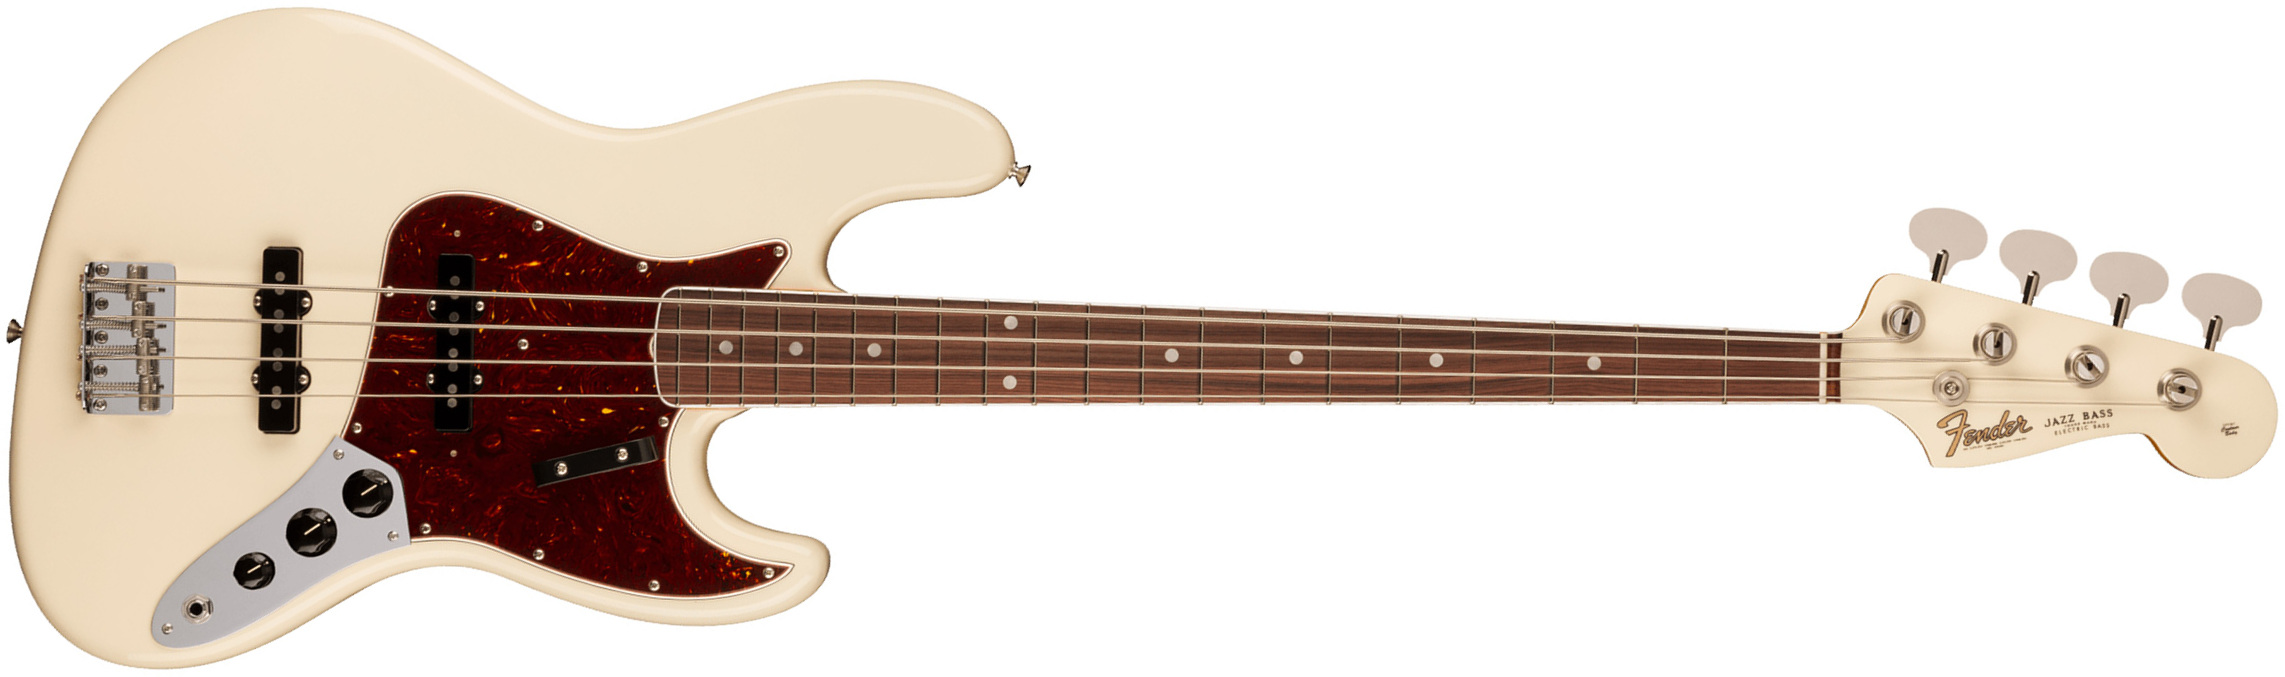 Fender Jazz Bass 1966 American Vintage Ii Usa Rw - Olympic White - Solid body electric bass - Main picture